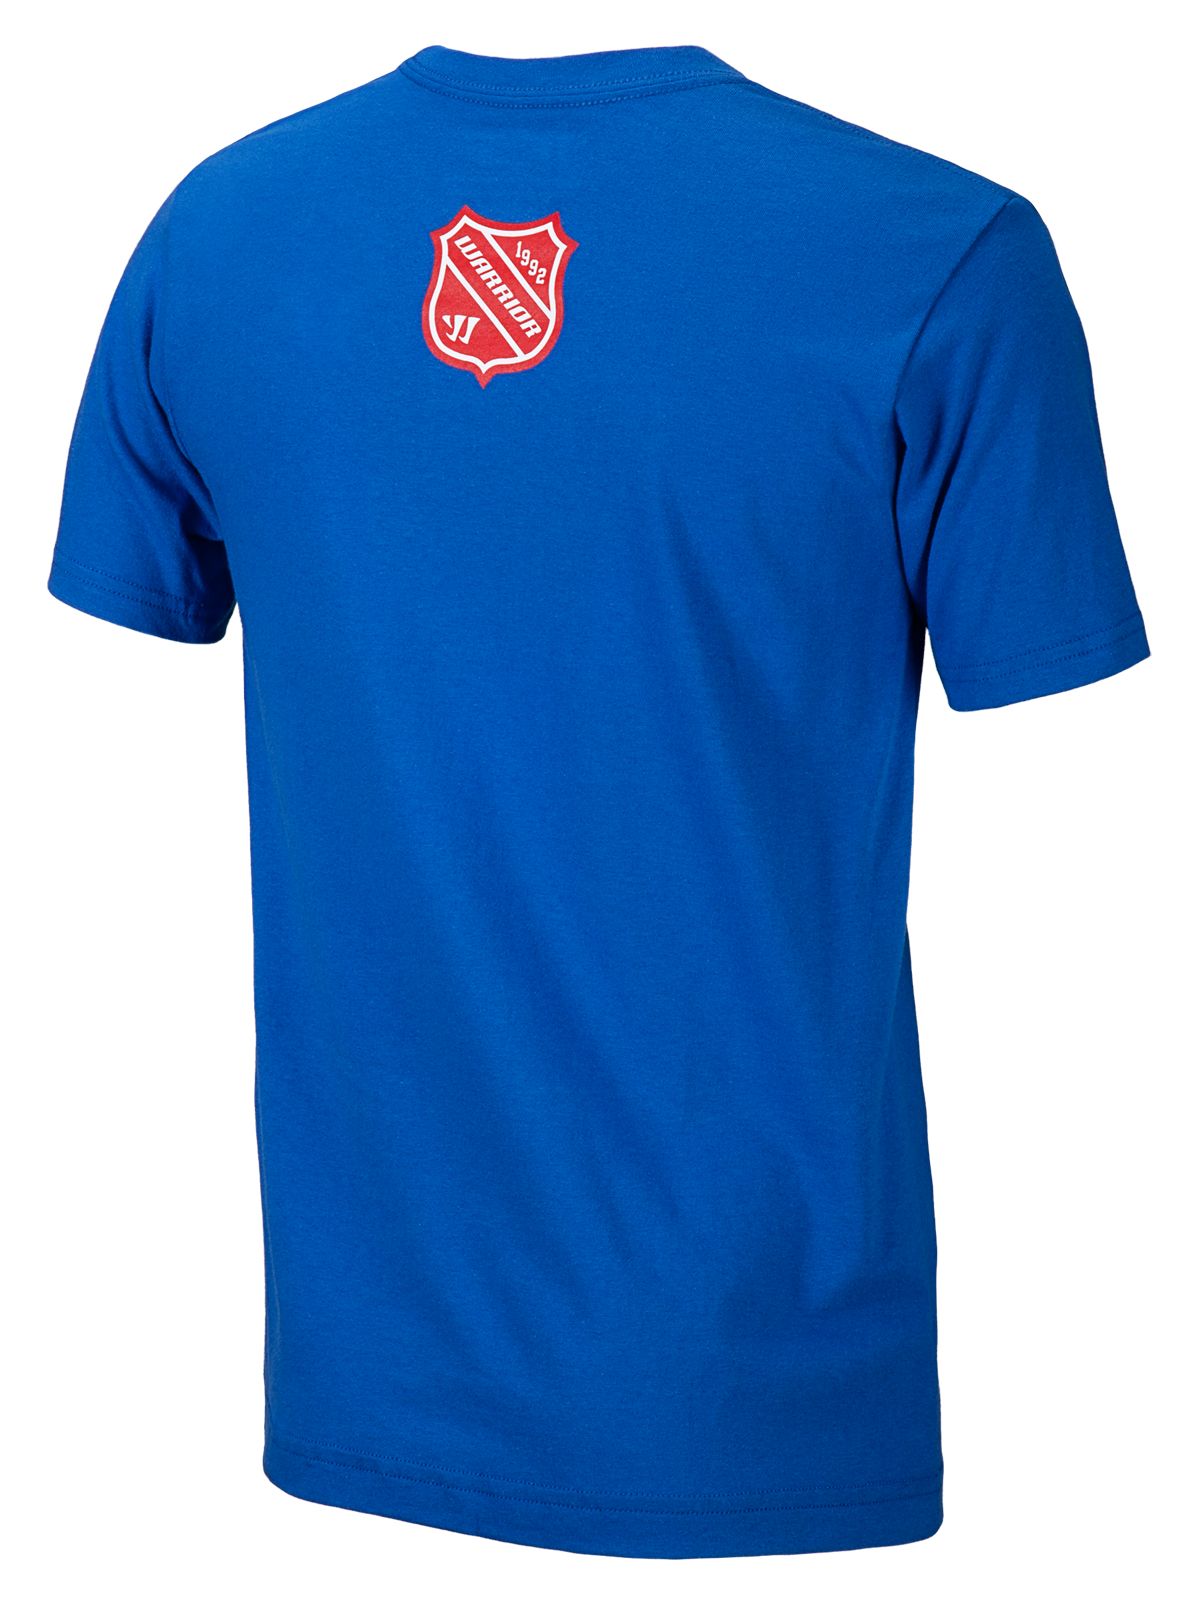 Youth Ladder Tee, Team Royal image number 0